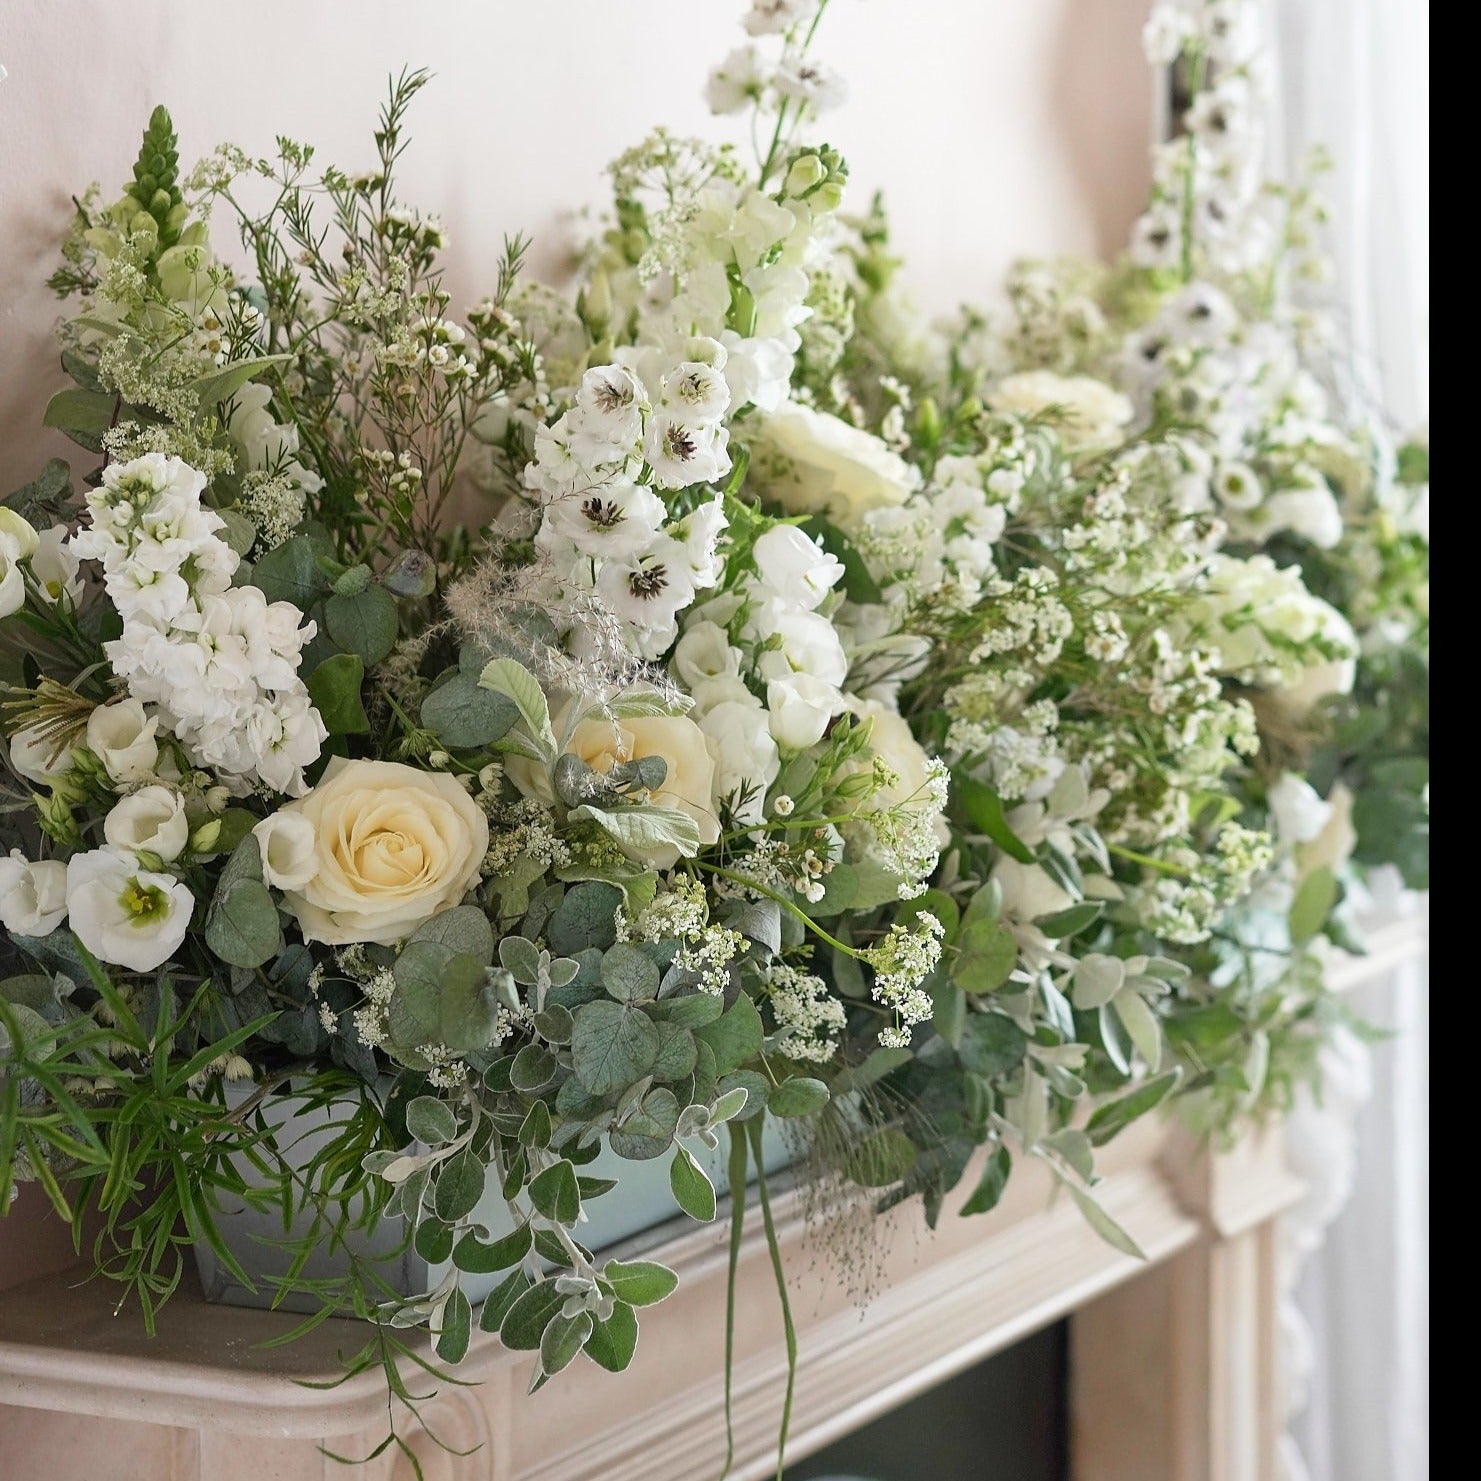 classic white and green foliage trough arrangement to decorate wedding venues and mantlepieces